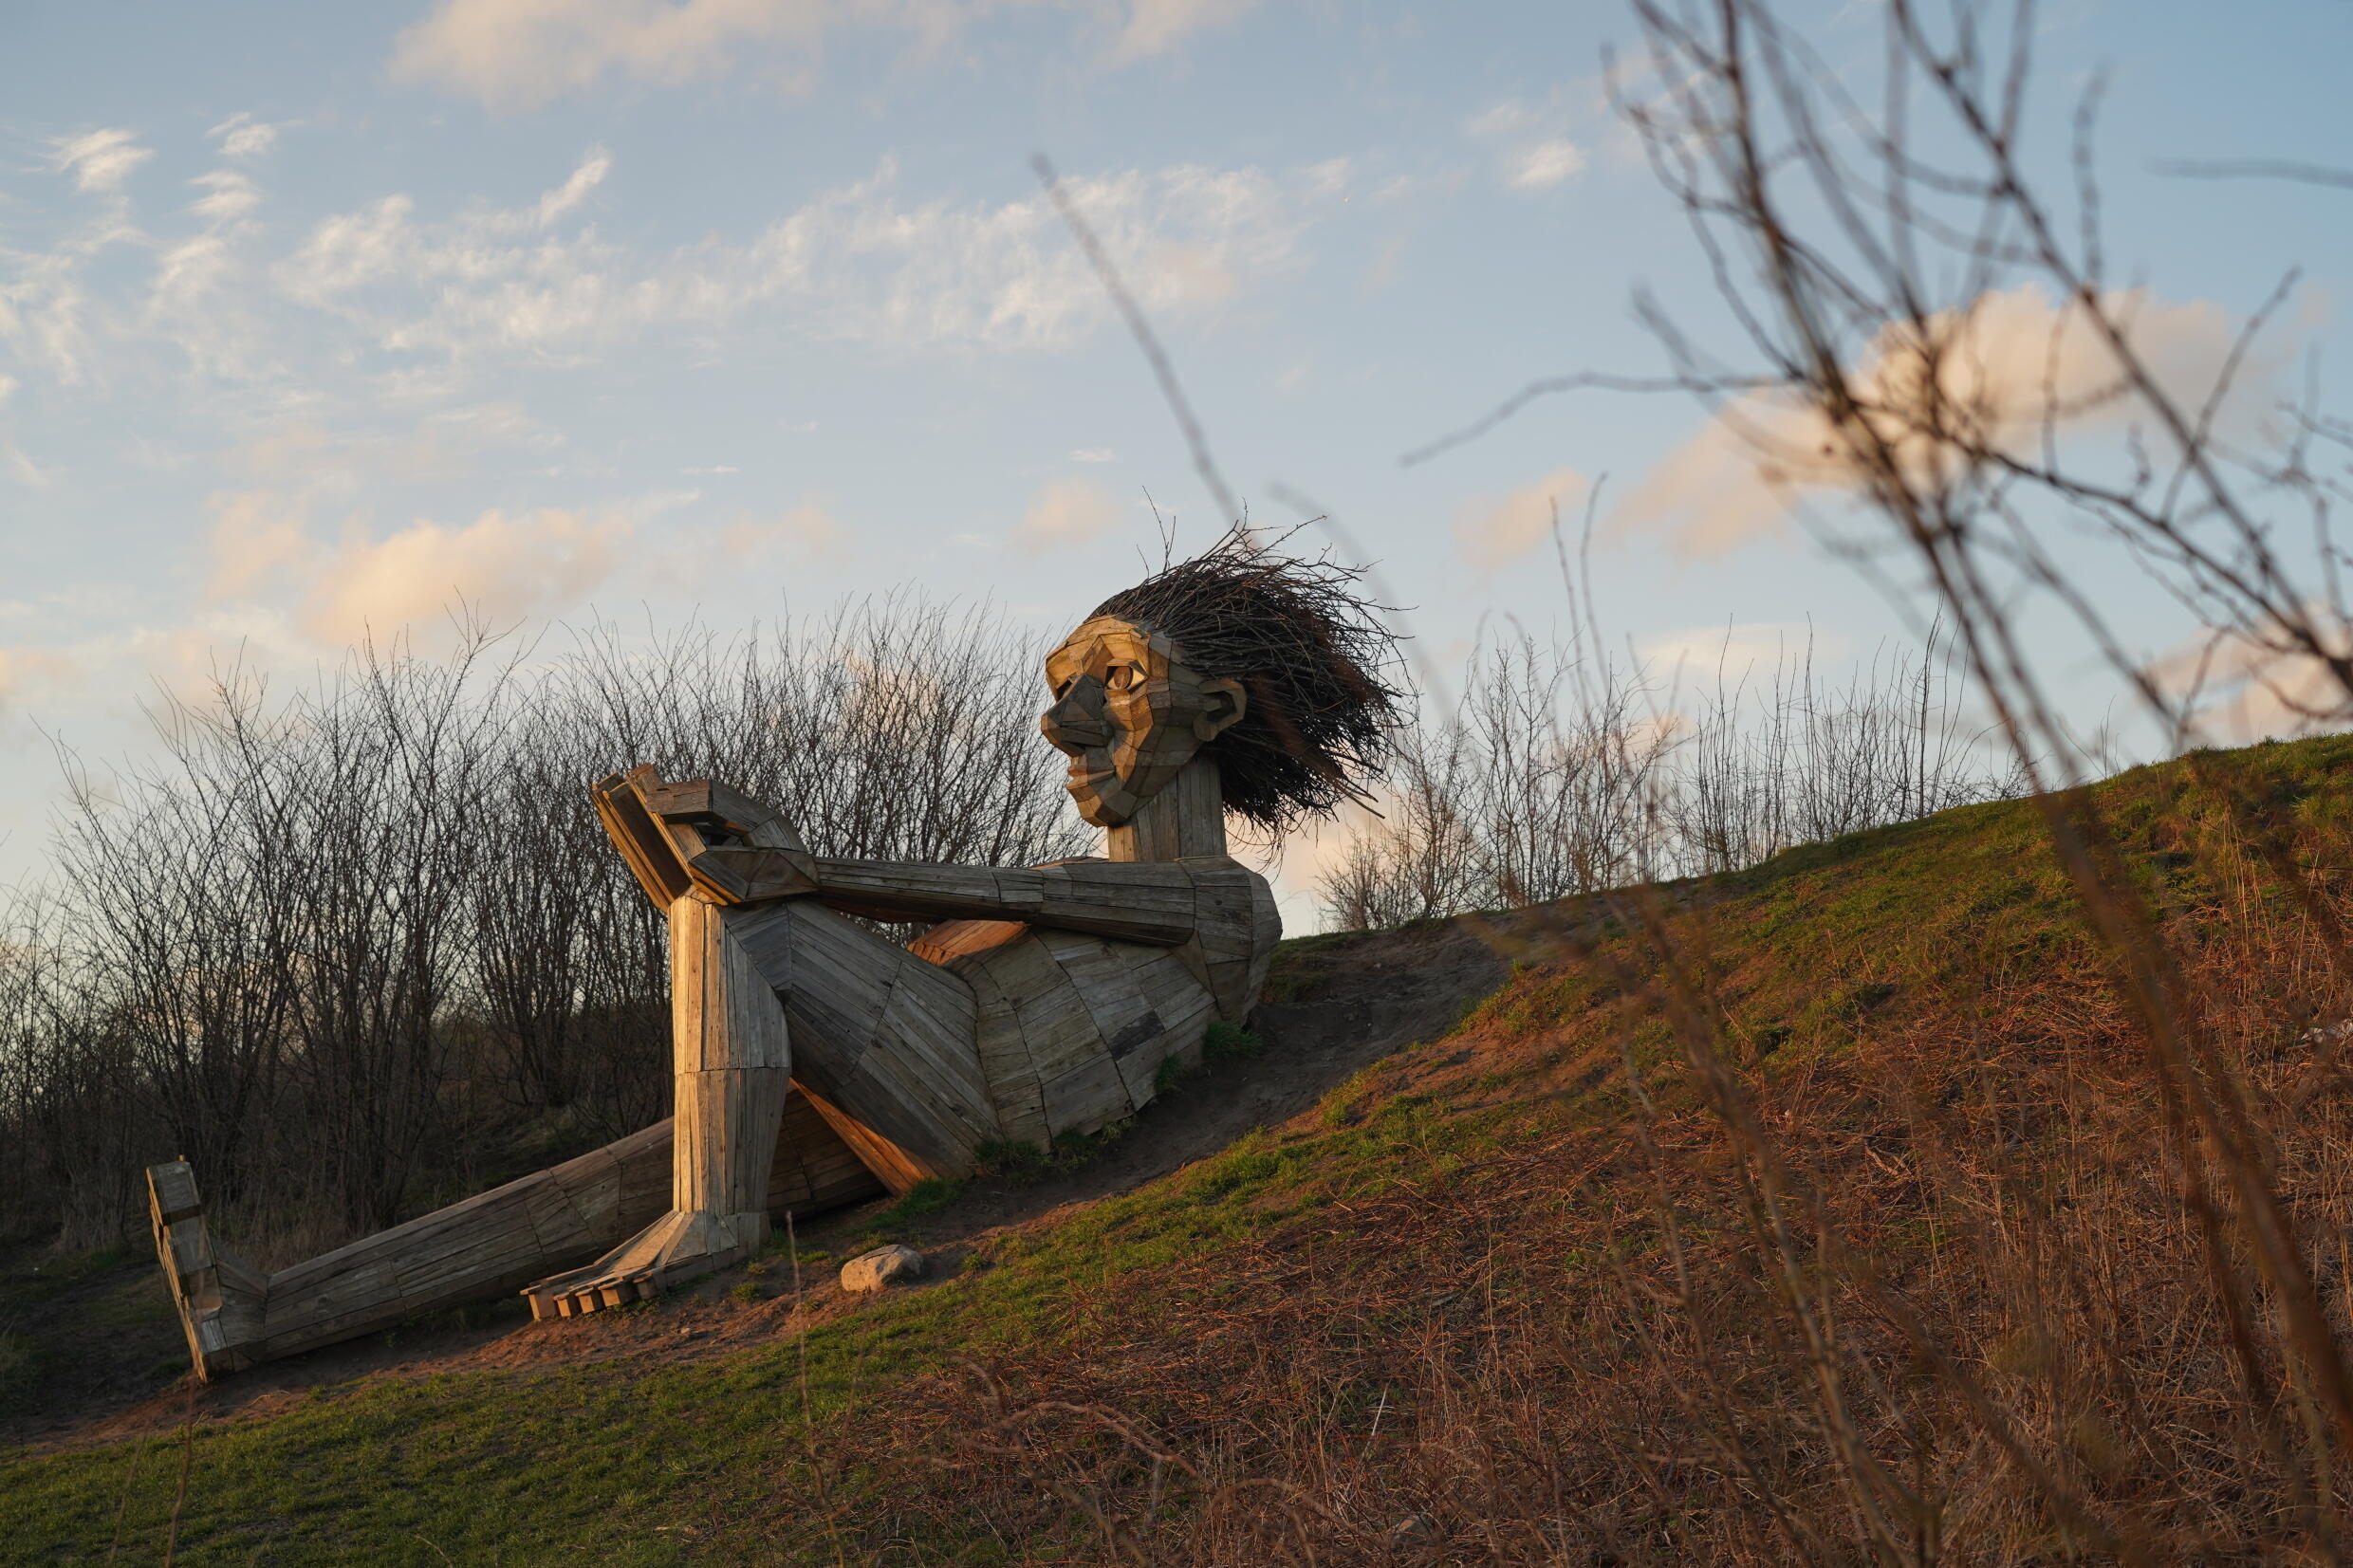 One of Dambo's giant trolls takes a little rest in Hvidovre, Denmark. Photo: AFP